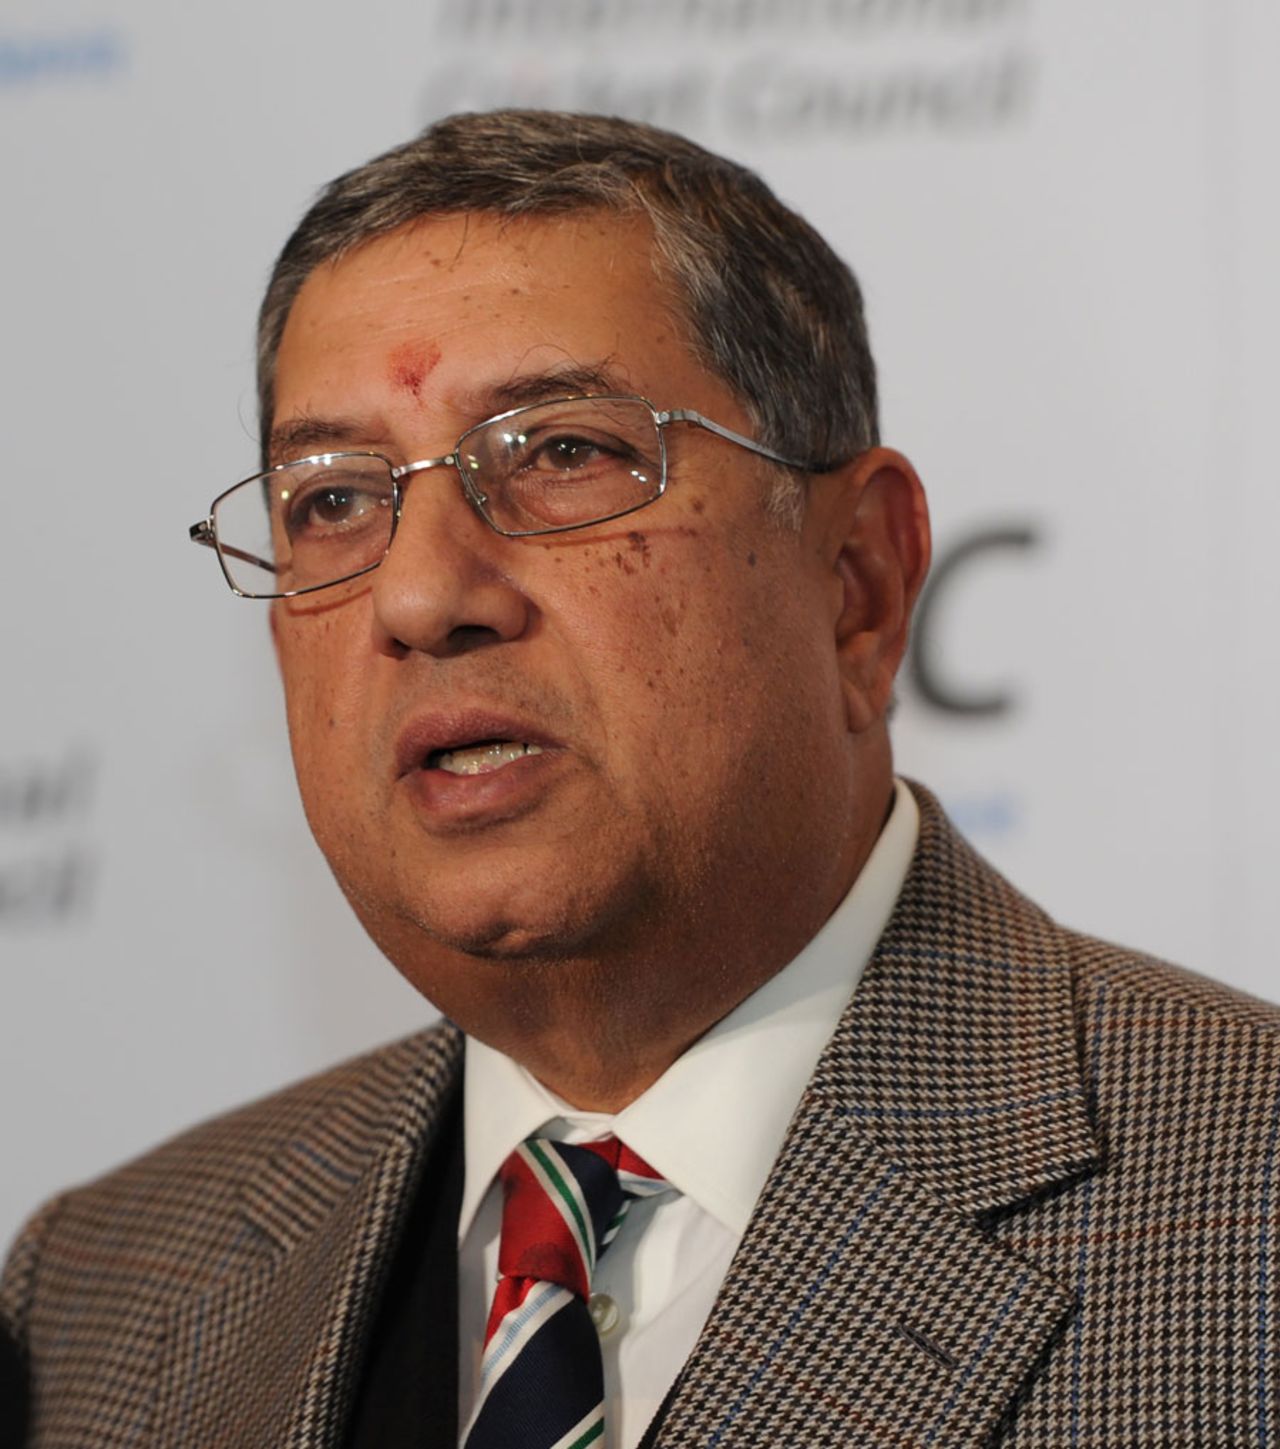 N Srinivasan speaks to the media after being confirmed as ICC chairman, Melbourne, June 26, 2014